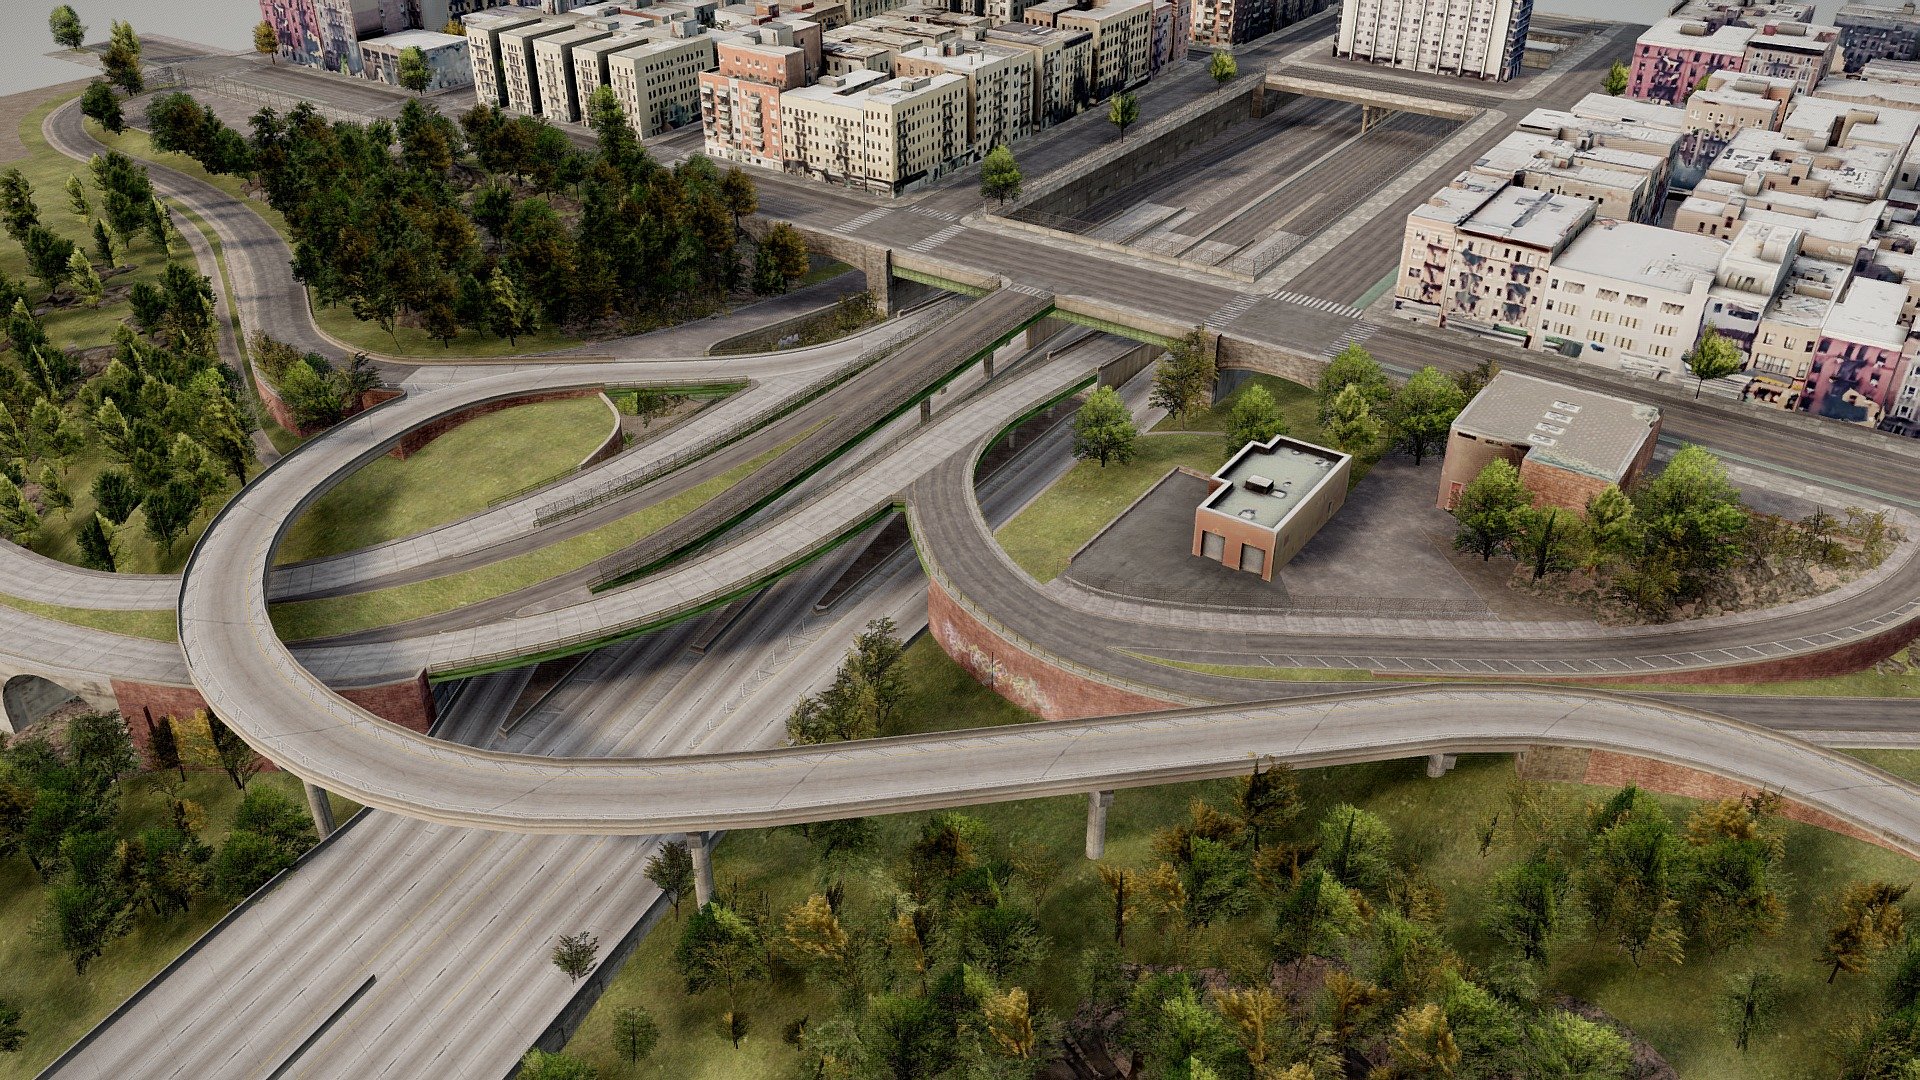 Interstate 95 Upper Level, New York, NY 10033, USA

A highway interchange scenery in New York, Little Dominican Republic made using Blender 3.3.2. 

This had been one of my older projects which I havent visted for a while, so I've dedicated some time refurbishing up this particular section for public use (yes I'm feeling extremely generous). The file size is pretty hefty so source files and textures are all included in a single folder - just be sure to extract zip file into a folder. 

Also quick side note, I haven't been able to find some time to finish the middle bridge (Alexander Hamilton Bridge) so maybe I can update that in the forseeable future.

Thank you for your support and enjoy! :] - [FREE] New York, Highway Interstate 95 - Download Free 3D model by 99.Miles 3d model